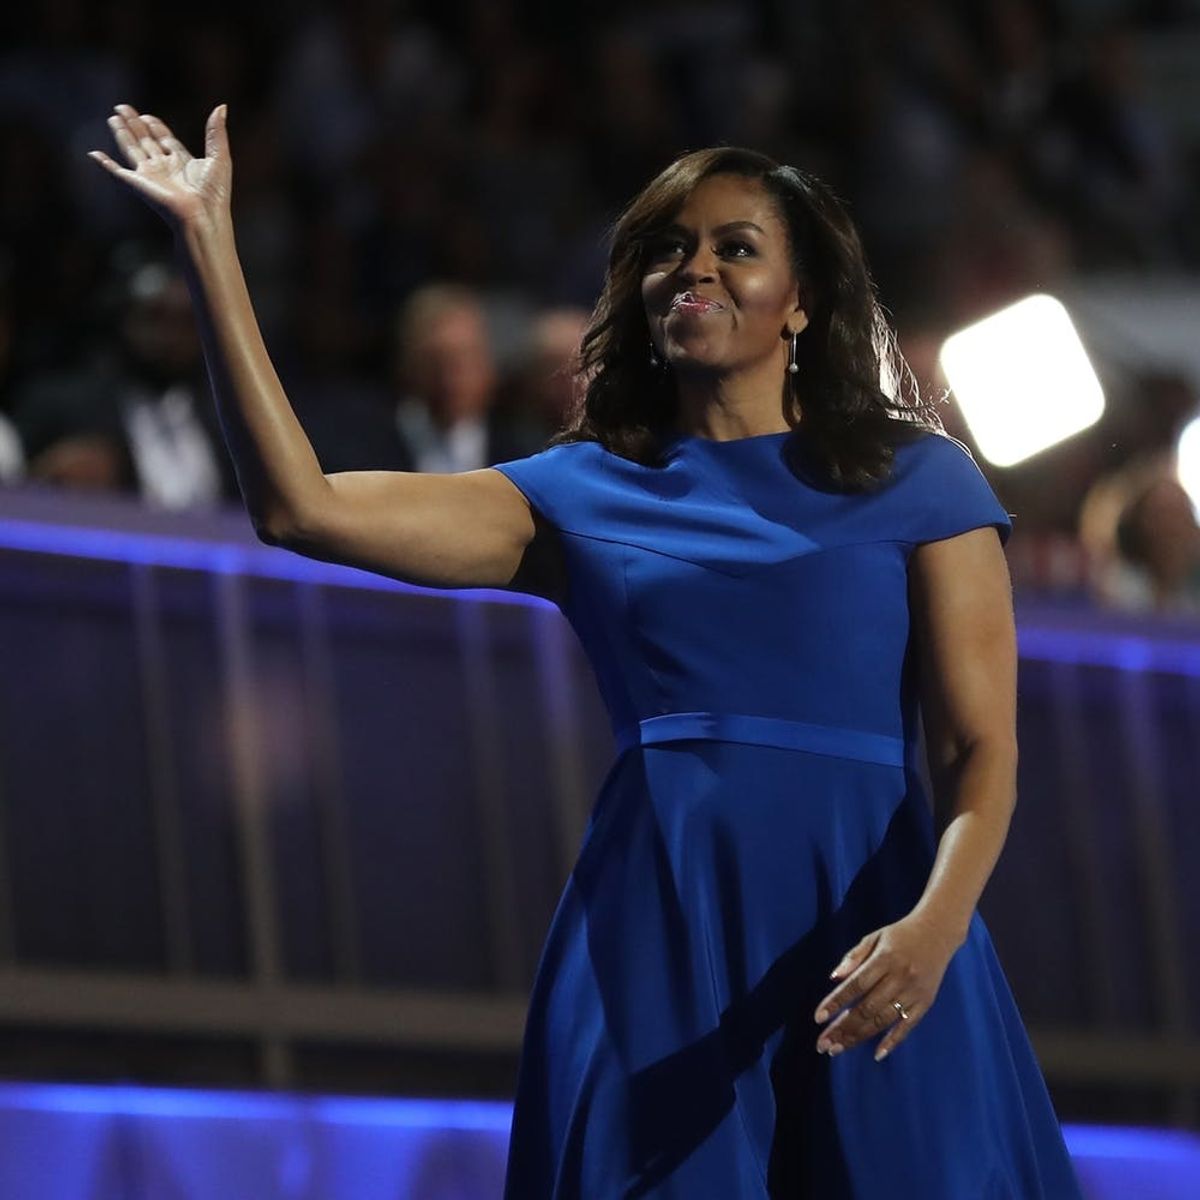 Reading Between the Lines of Michelle Obama’s Most Memorable Fashion Moments